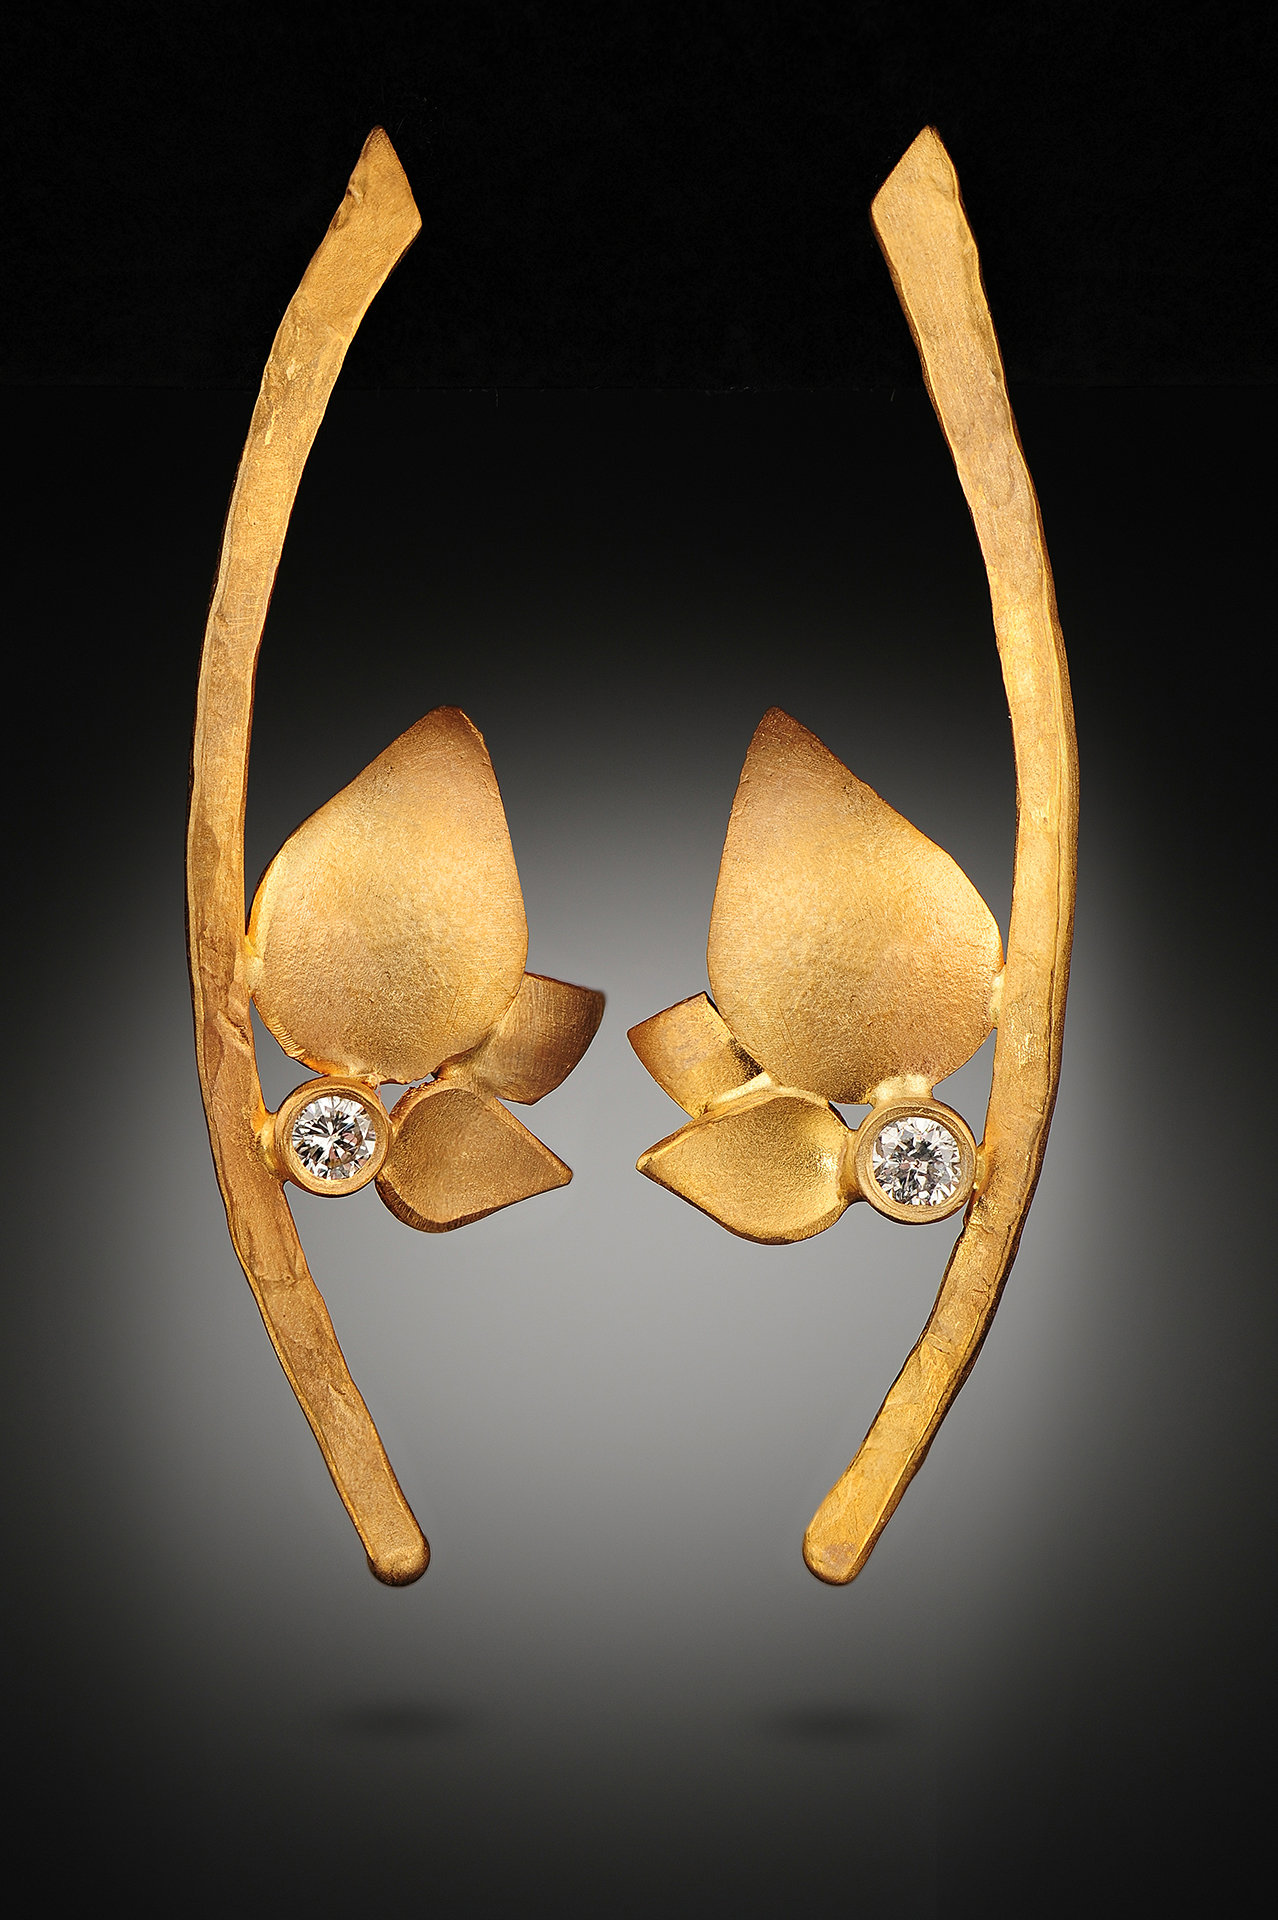 Branch Leaves by Rosario Garcia (Gold & Stone Earrings) | Artful Home